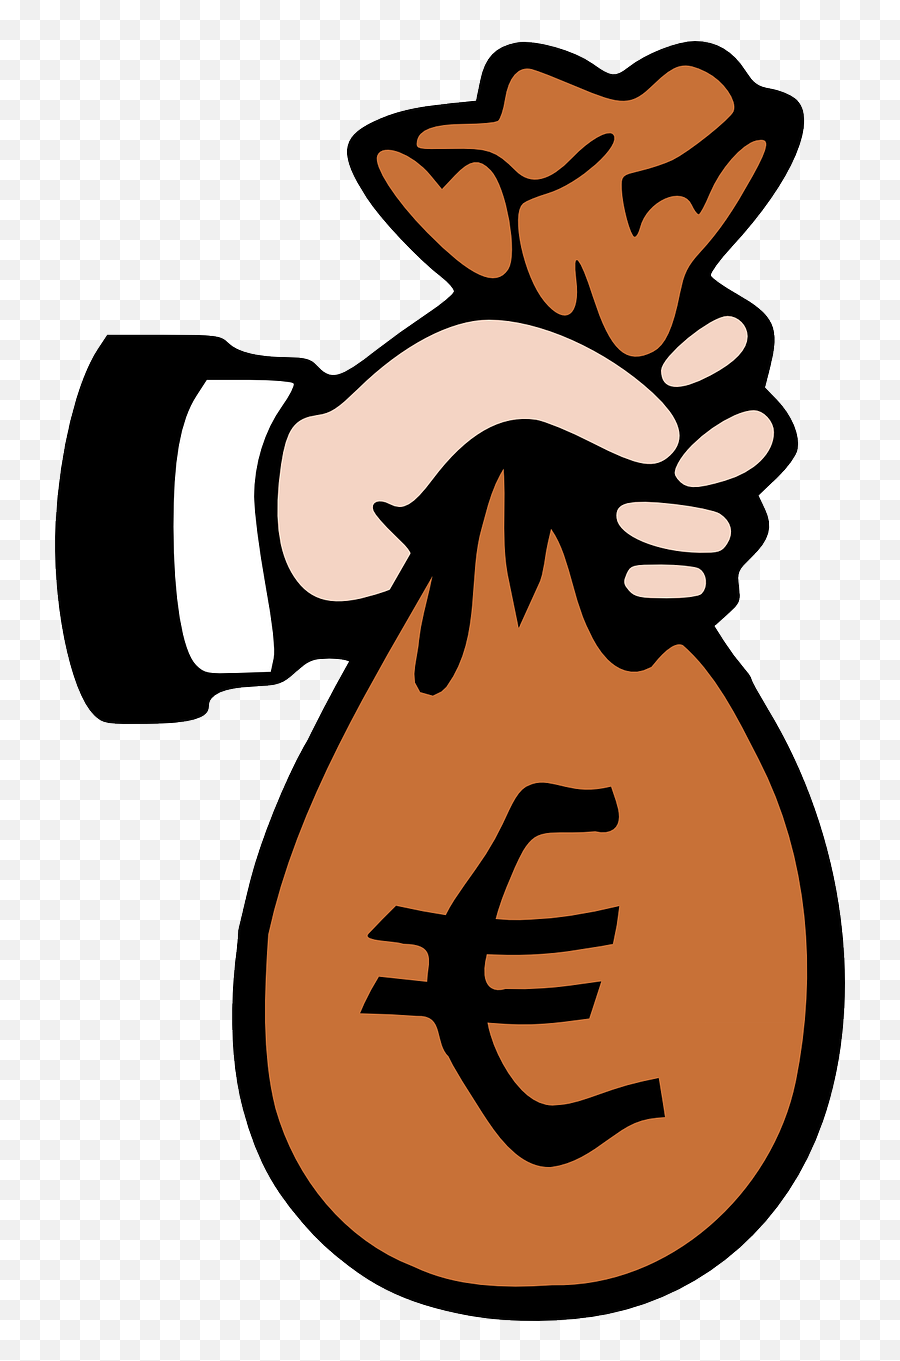 Difference Between Theft And Extortion - Money Bag Clipart Purple Money Bag Clipart Emoji,Moneybag Emoji